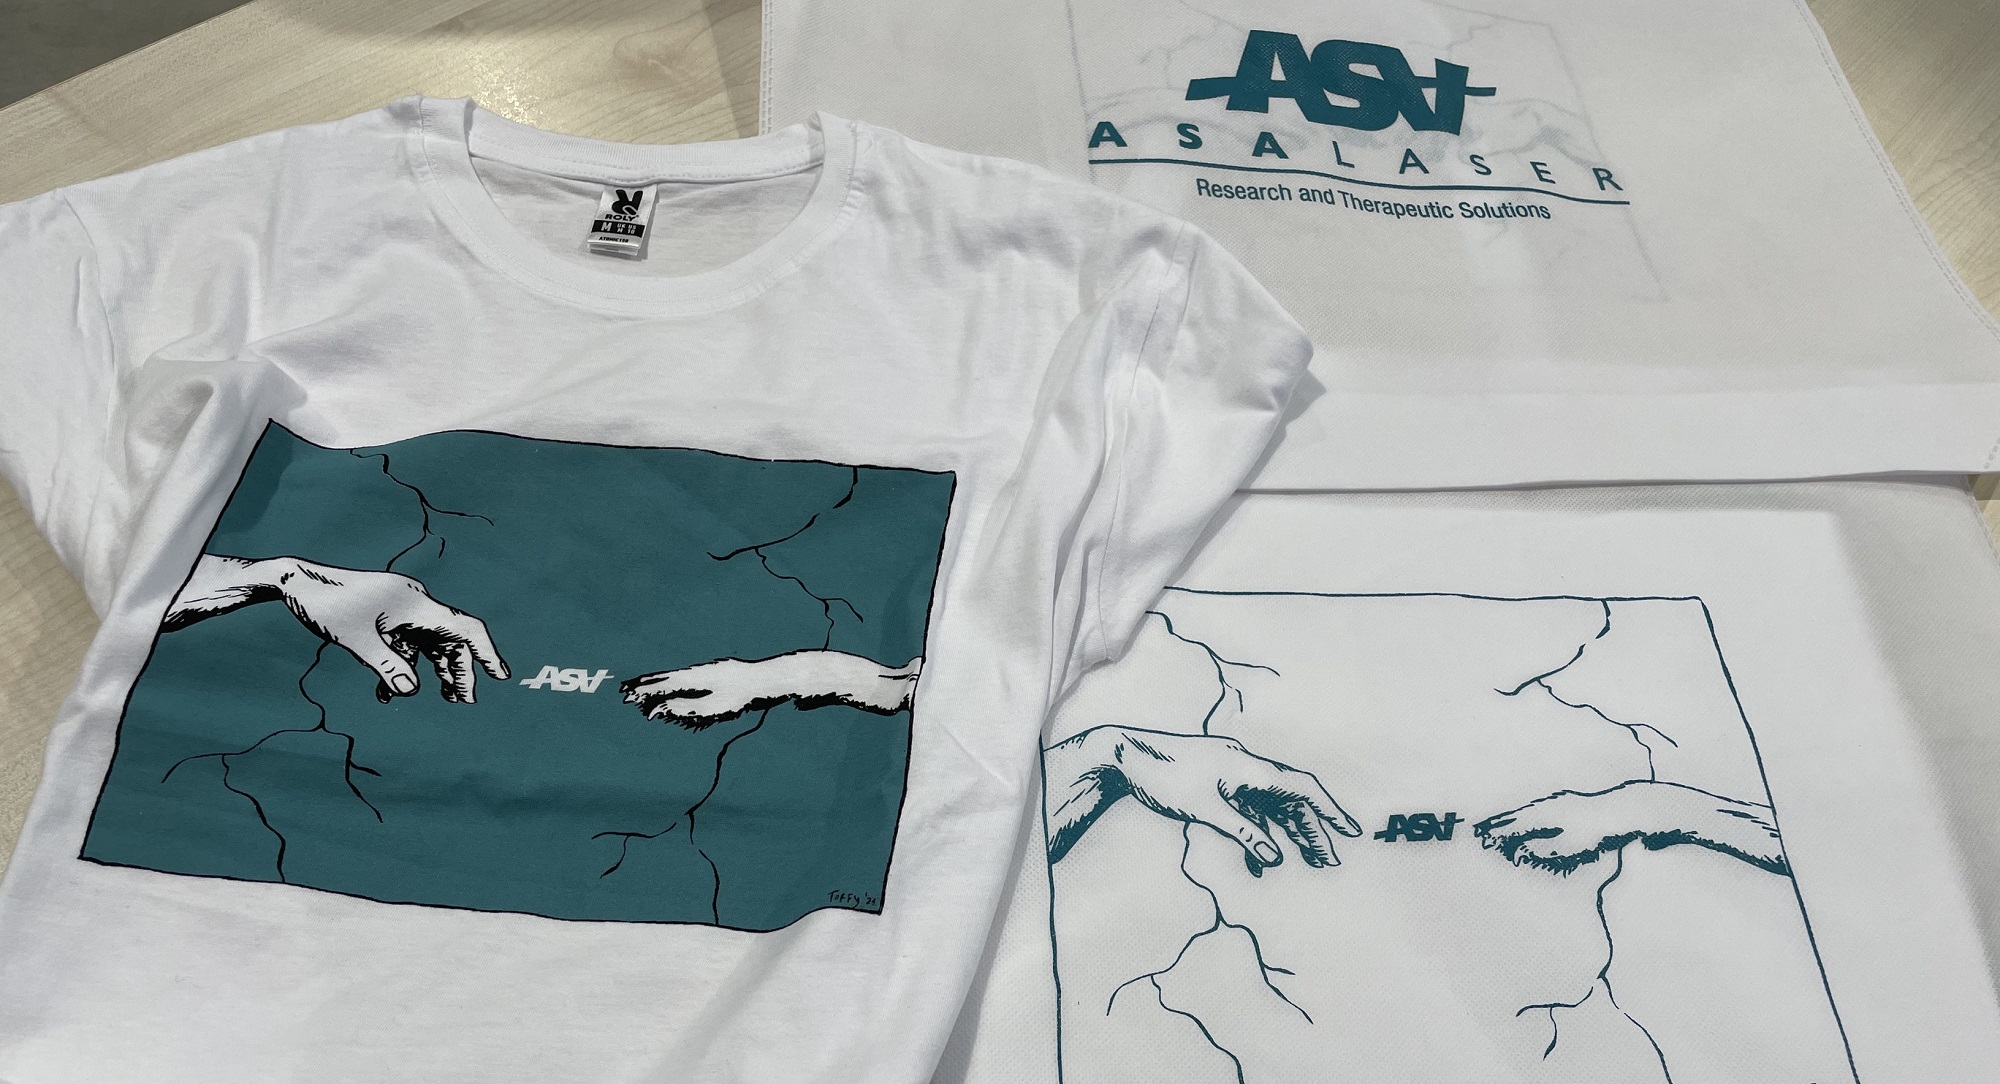 #asa40 - Merchandise by Toffy